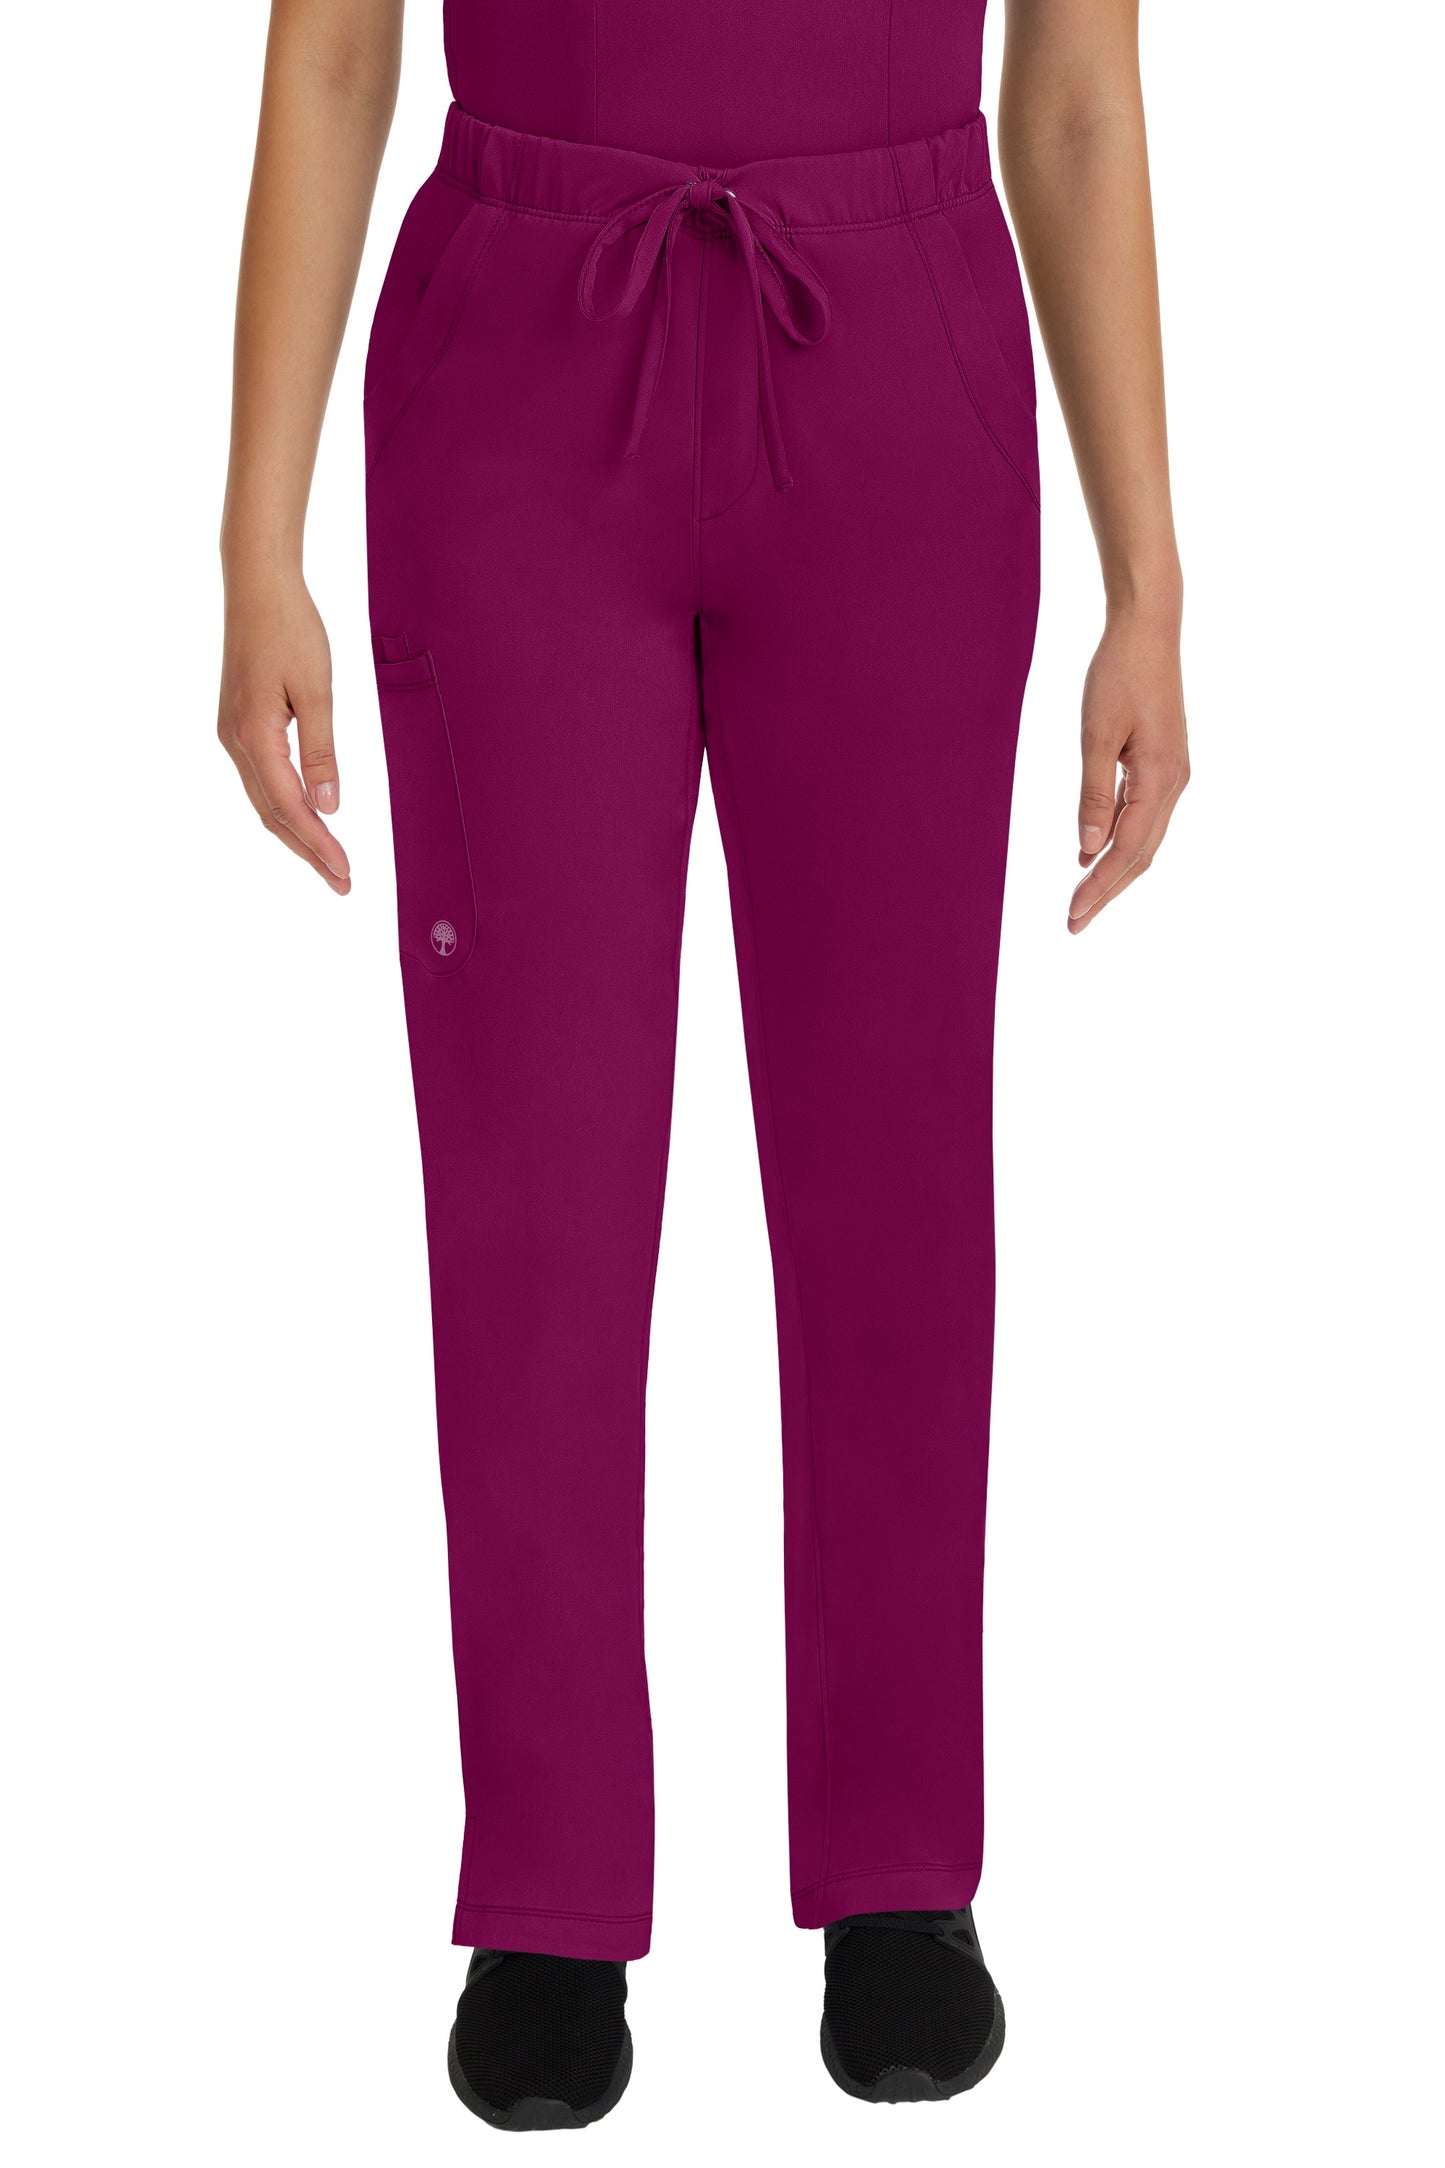 Healing Hands HH Works Rebecca Tall Scrub Pant in Wine at Parker's Clothing and Shoes.